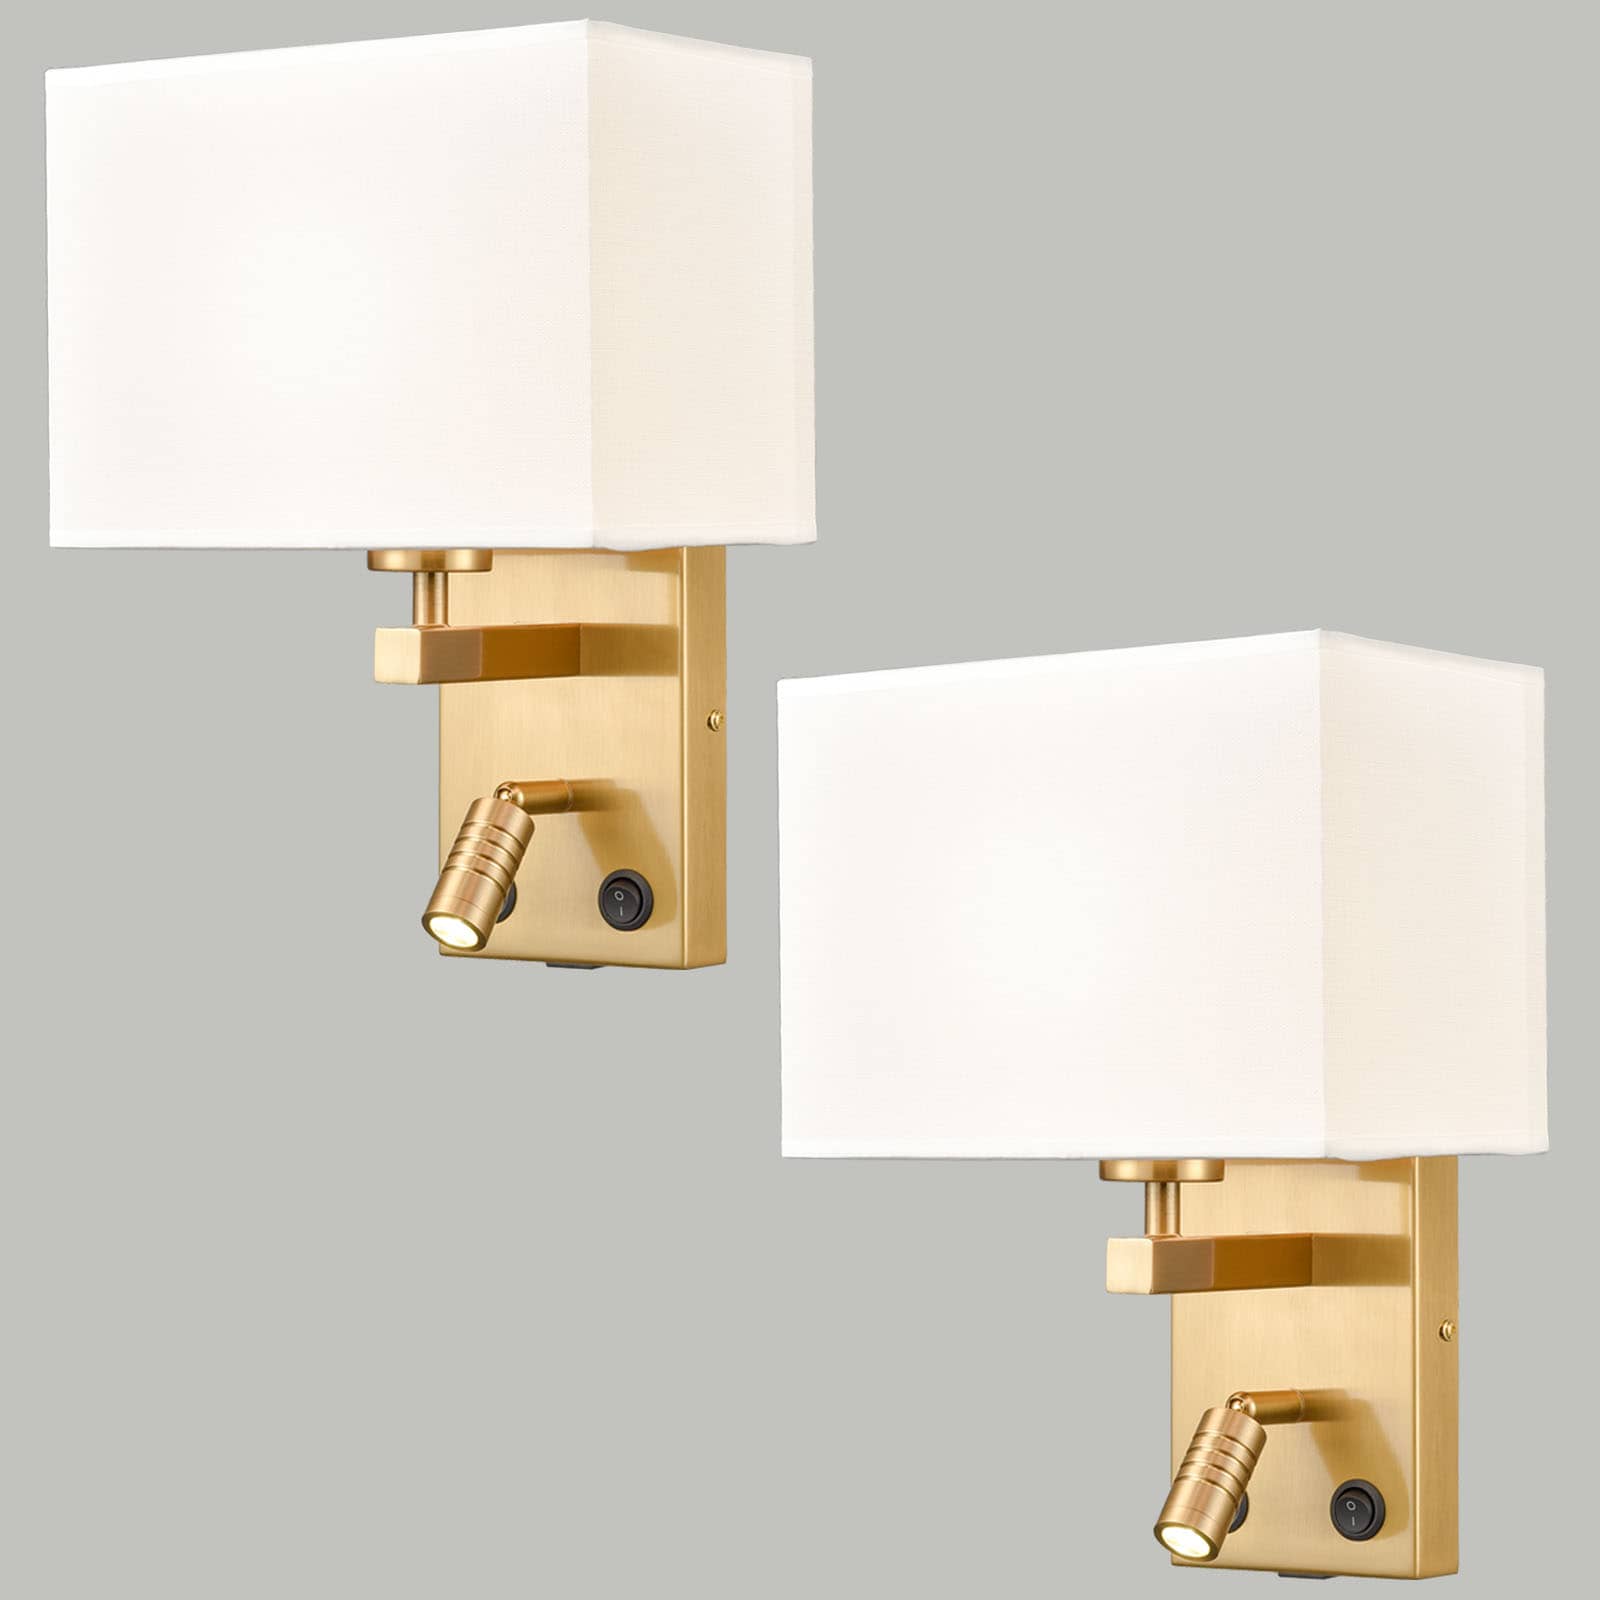 Switched Retro Lamp Wall Mounted Lights Rustic Sconce Fixture Brushed Colour Kit 